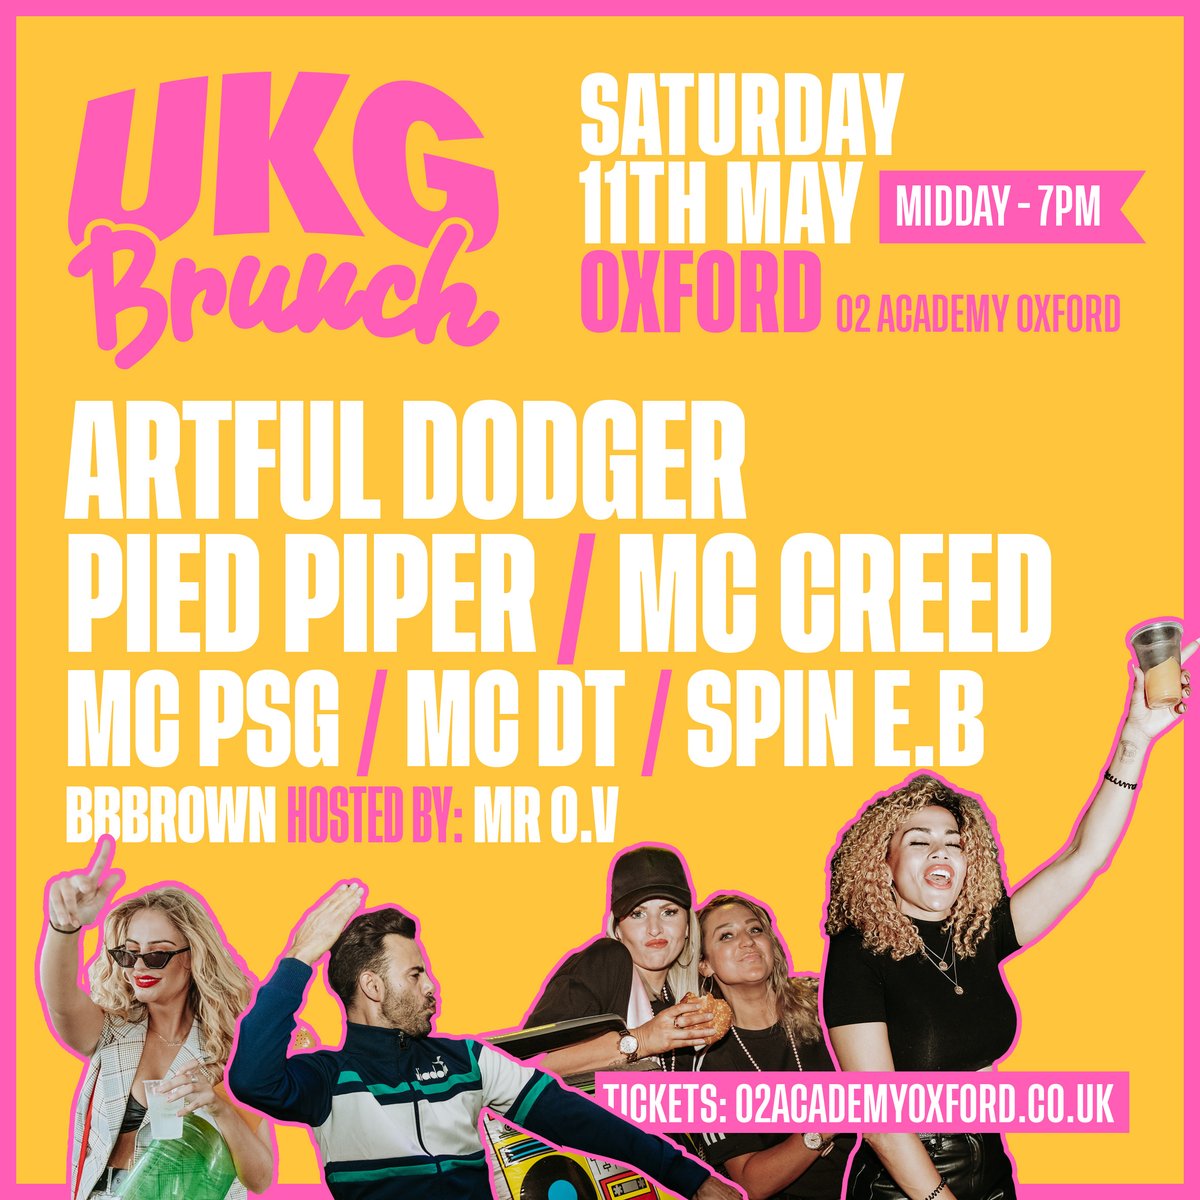 Sat 11 May, @UKG_Brunch are here for an unforgettable mix of finger-licking brunch and big tunes from the best old school garage DJs & MCs, feat. Artful Dodger, Pied Piper, MC Creed, MC PSG, MC DT, Spin E.B, BBBrown and Mr O.V. Tickets - amg-venues.com/Z7aX50Rm9OA